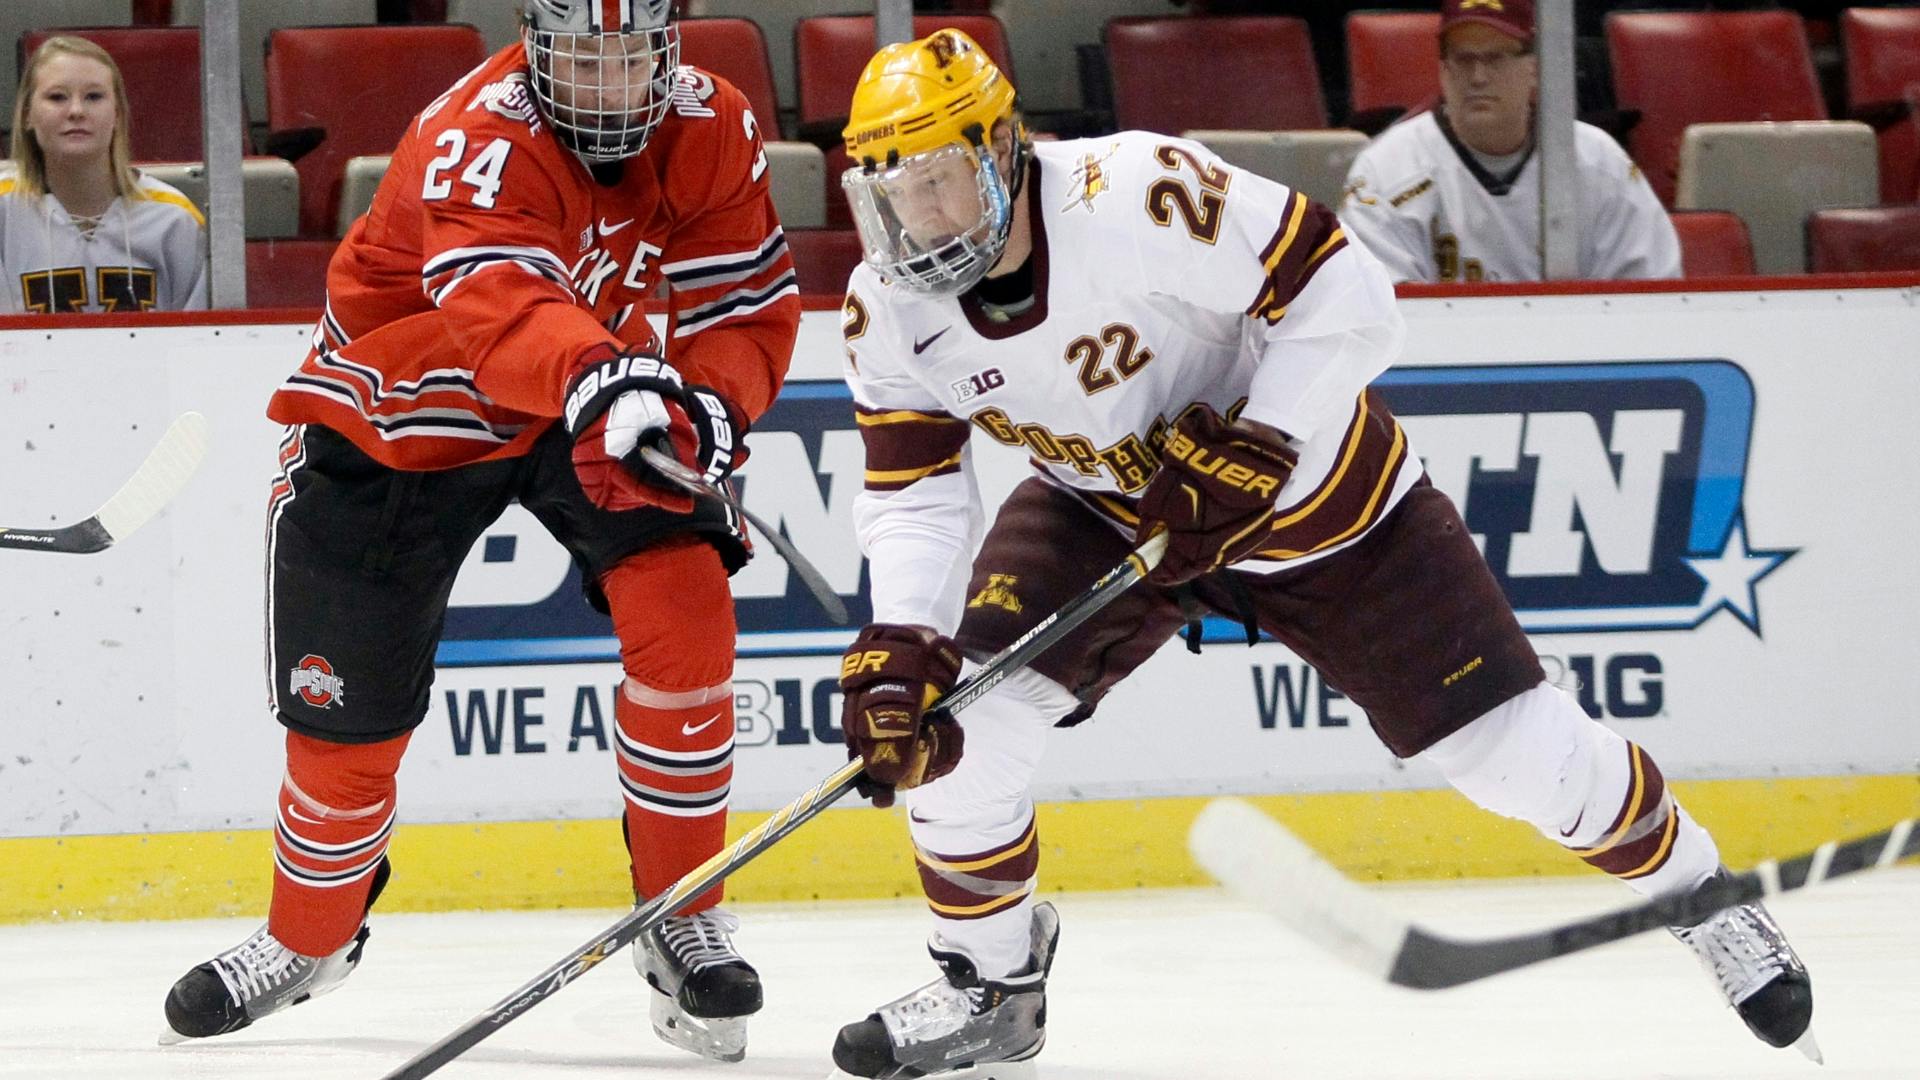 Seth Ambroz was part of the Gophers' all-senior line of Sam Warning and Travis Boyd that accounted for two goals in a 3-0 victory over Ohio State in the Big Ten tournament semifinals.